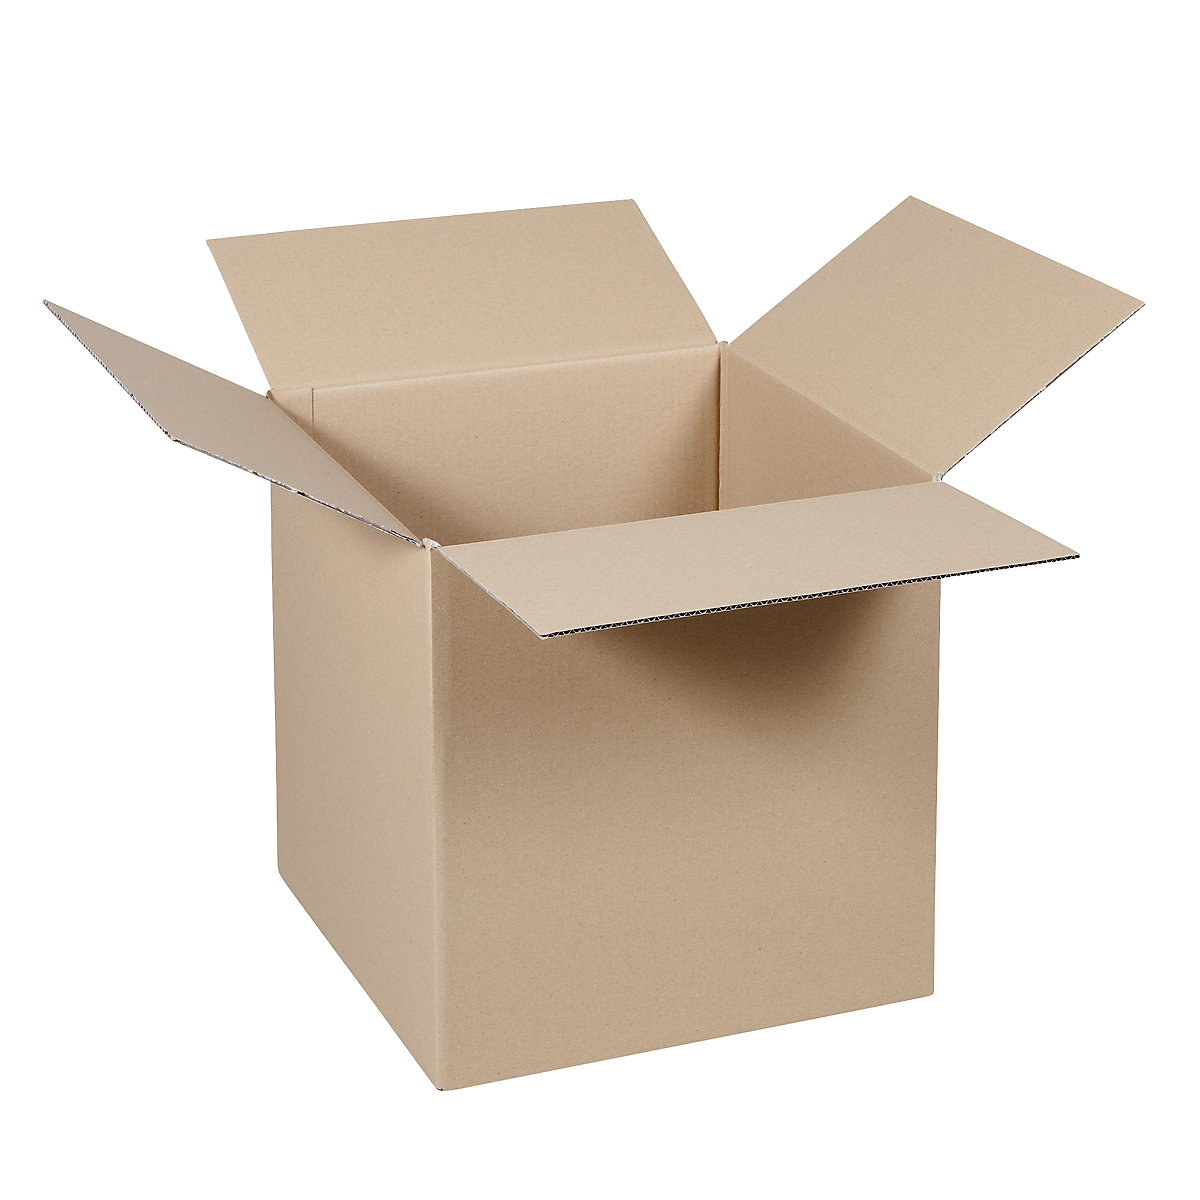 Folding cardboard box, FEFCO 0201, made of double fluted cardboard, internal dimensions 300 x 300 x 300 mm, pack of 100-51